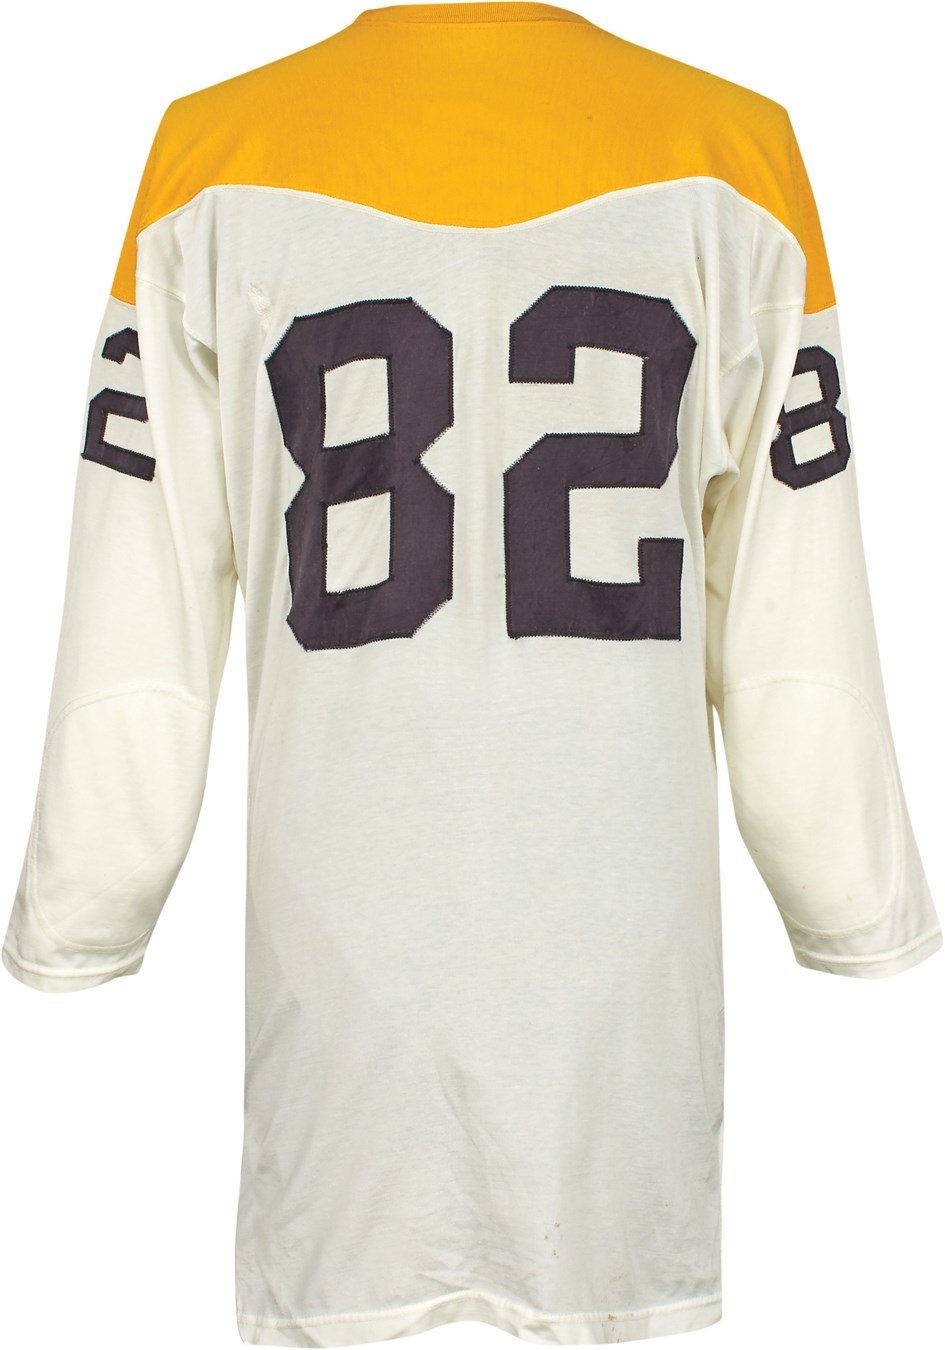 The Pittsburgh Steelers Game Worn Jersey Archive - 1966-67 John Hilton Pittsburgh Steelers Game Worn Jersey